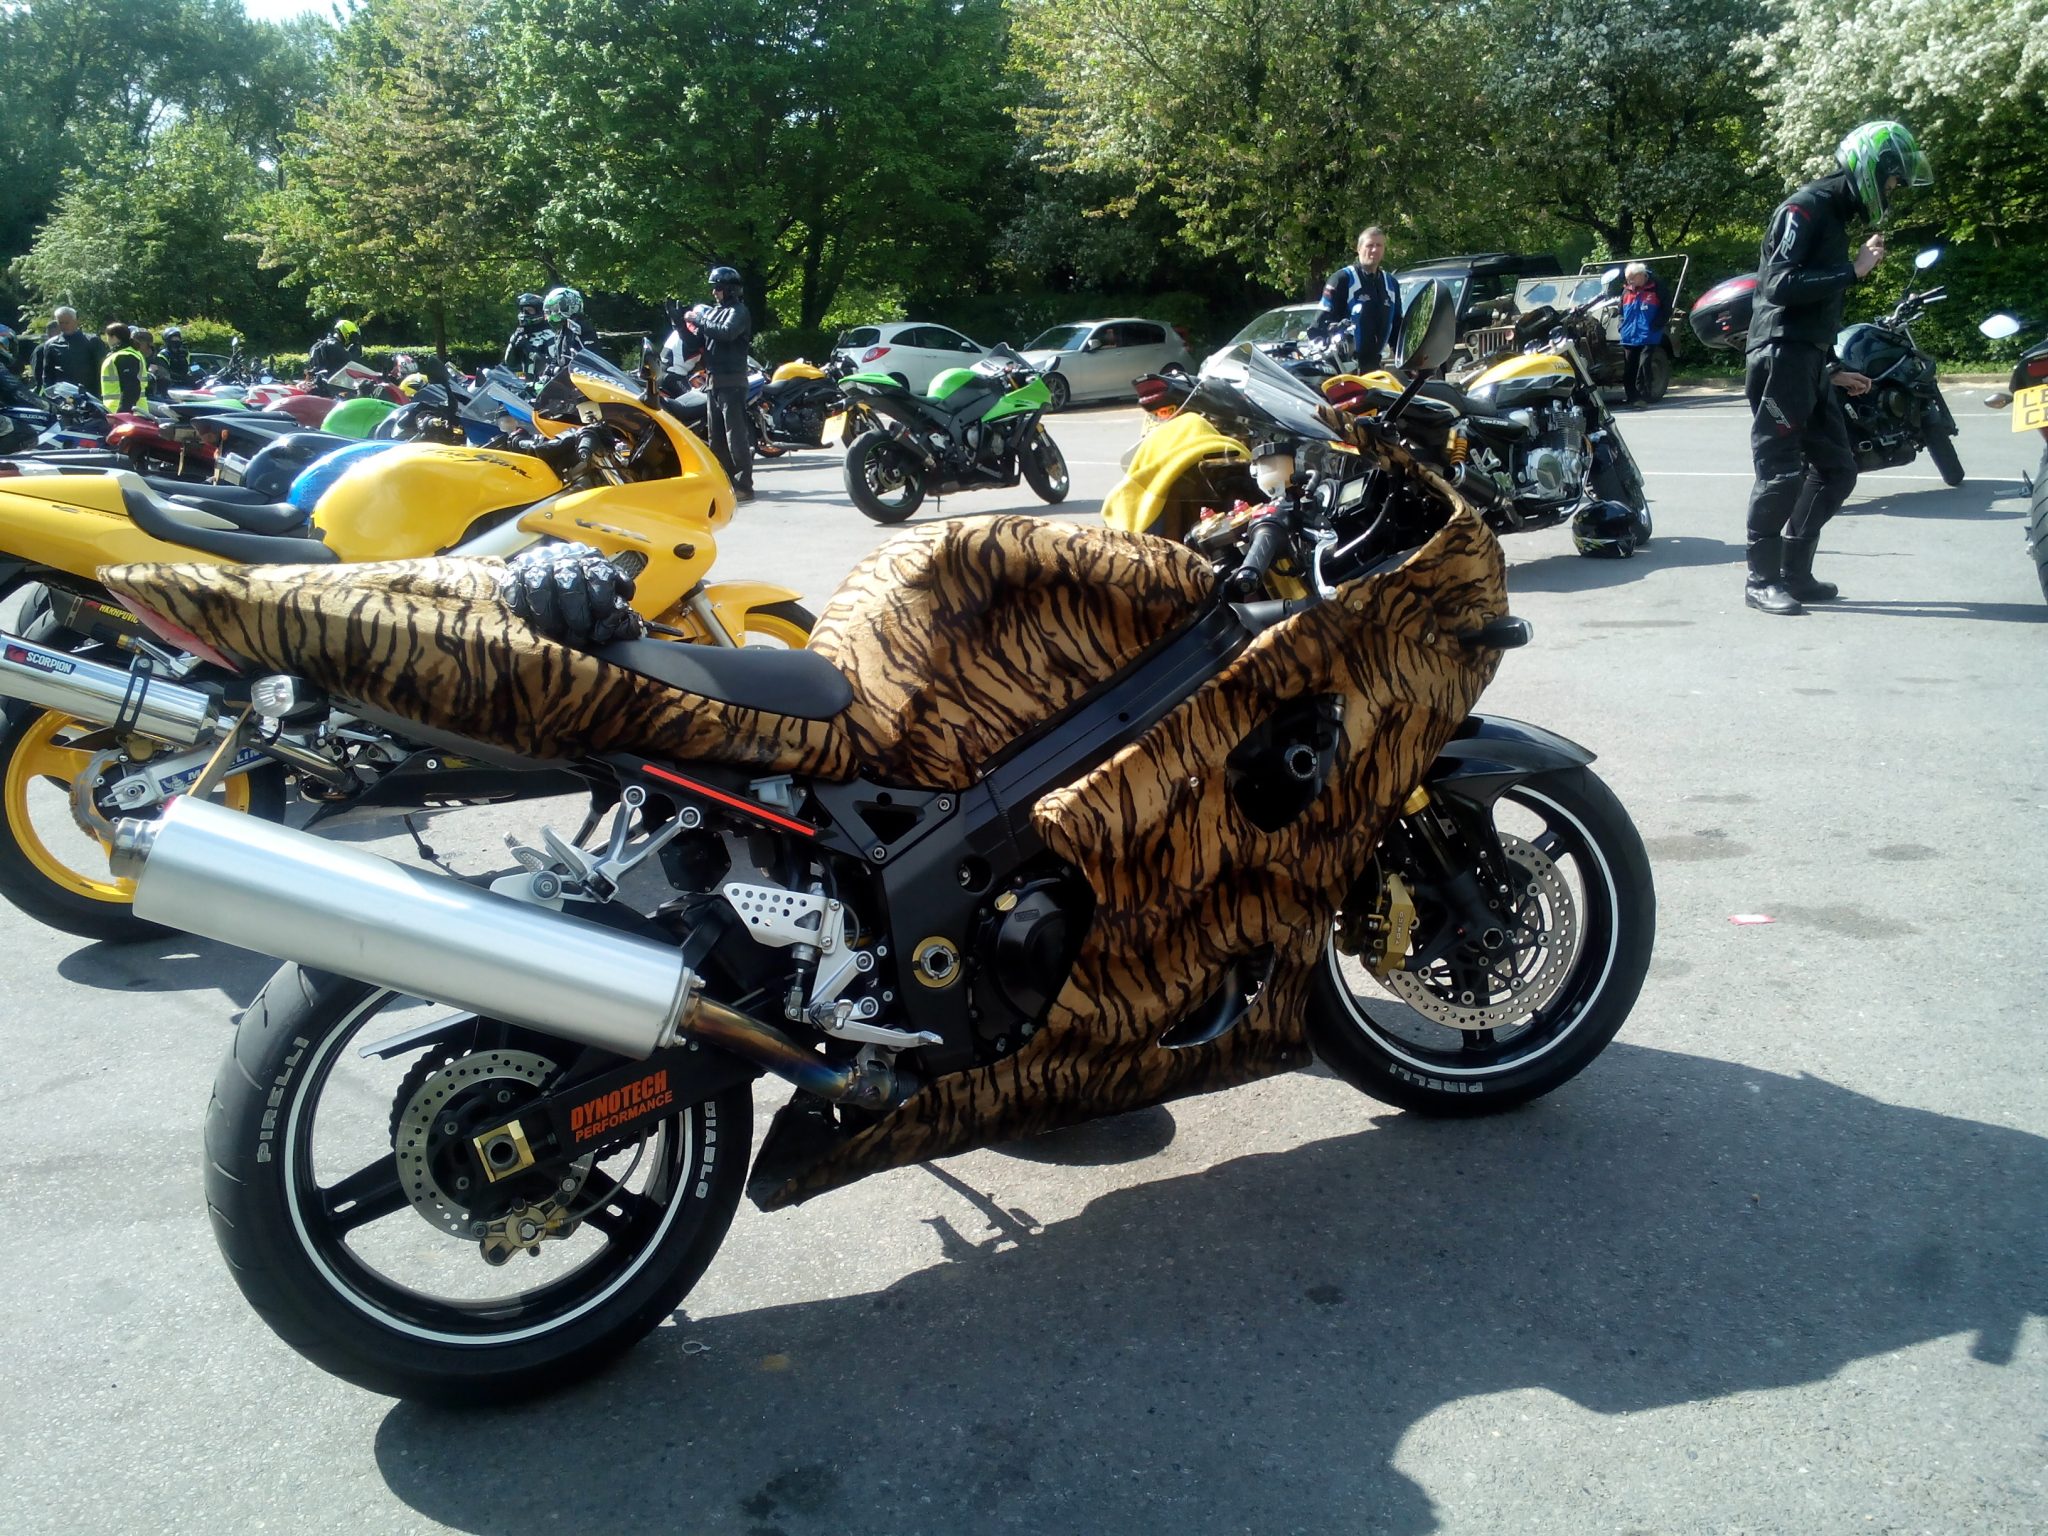 Last, but not least: have you ever seen a bike with fur before?